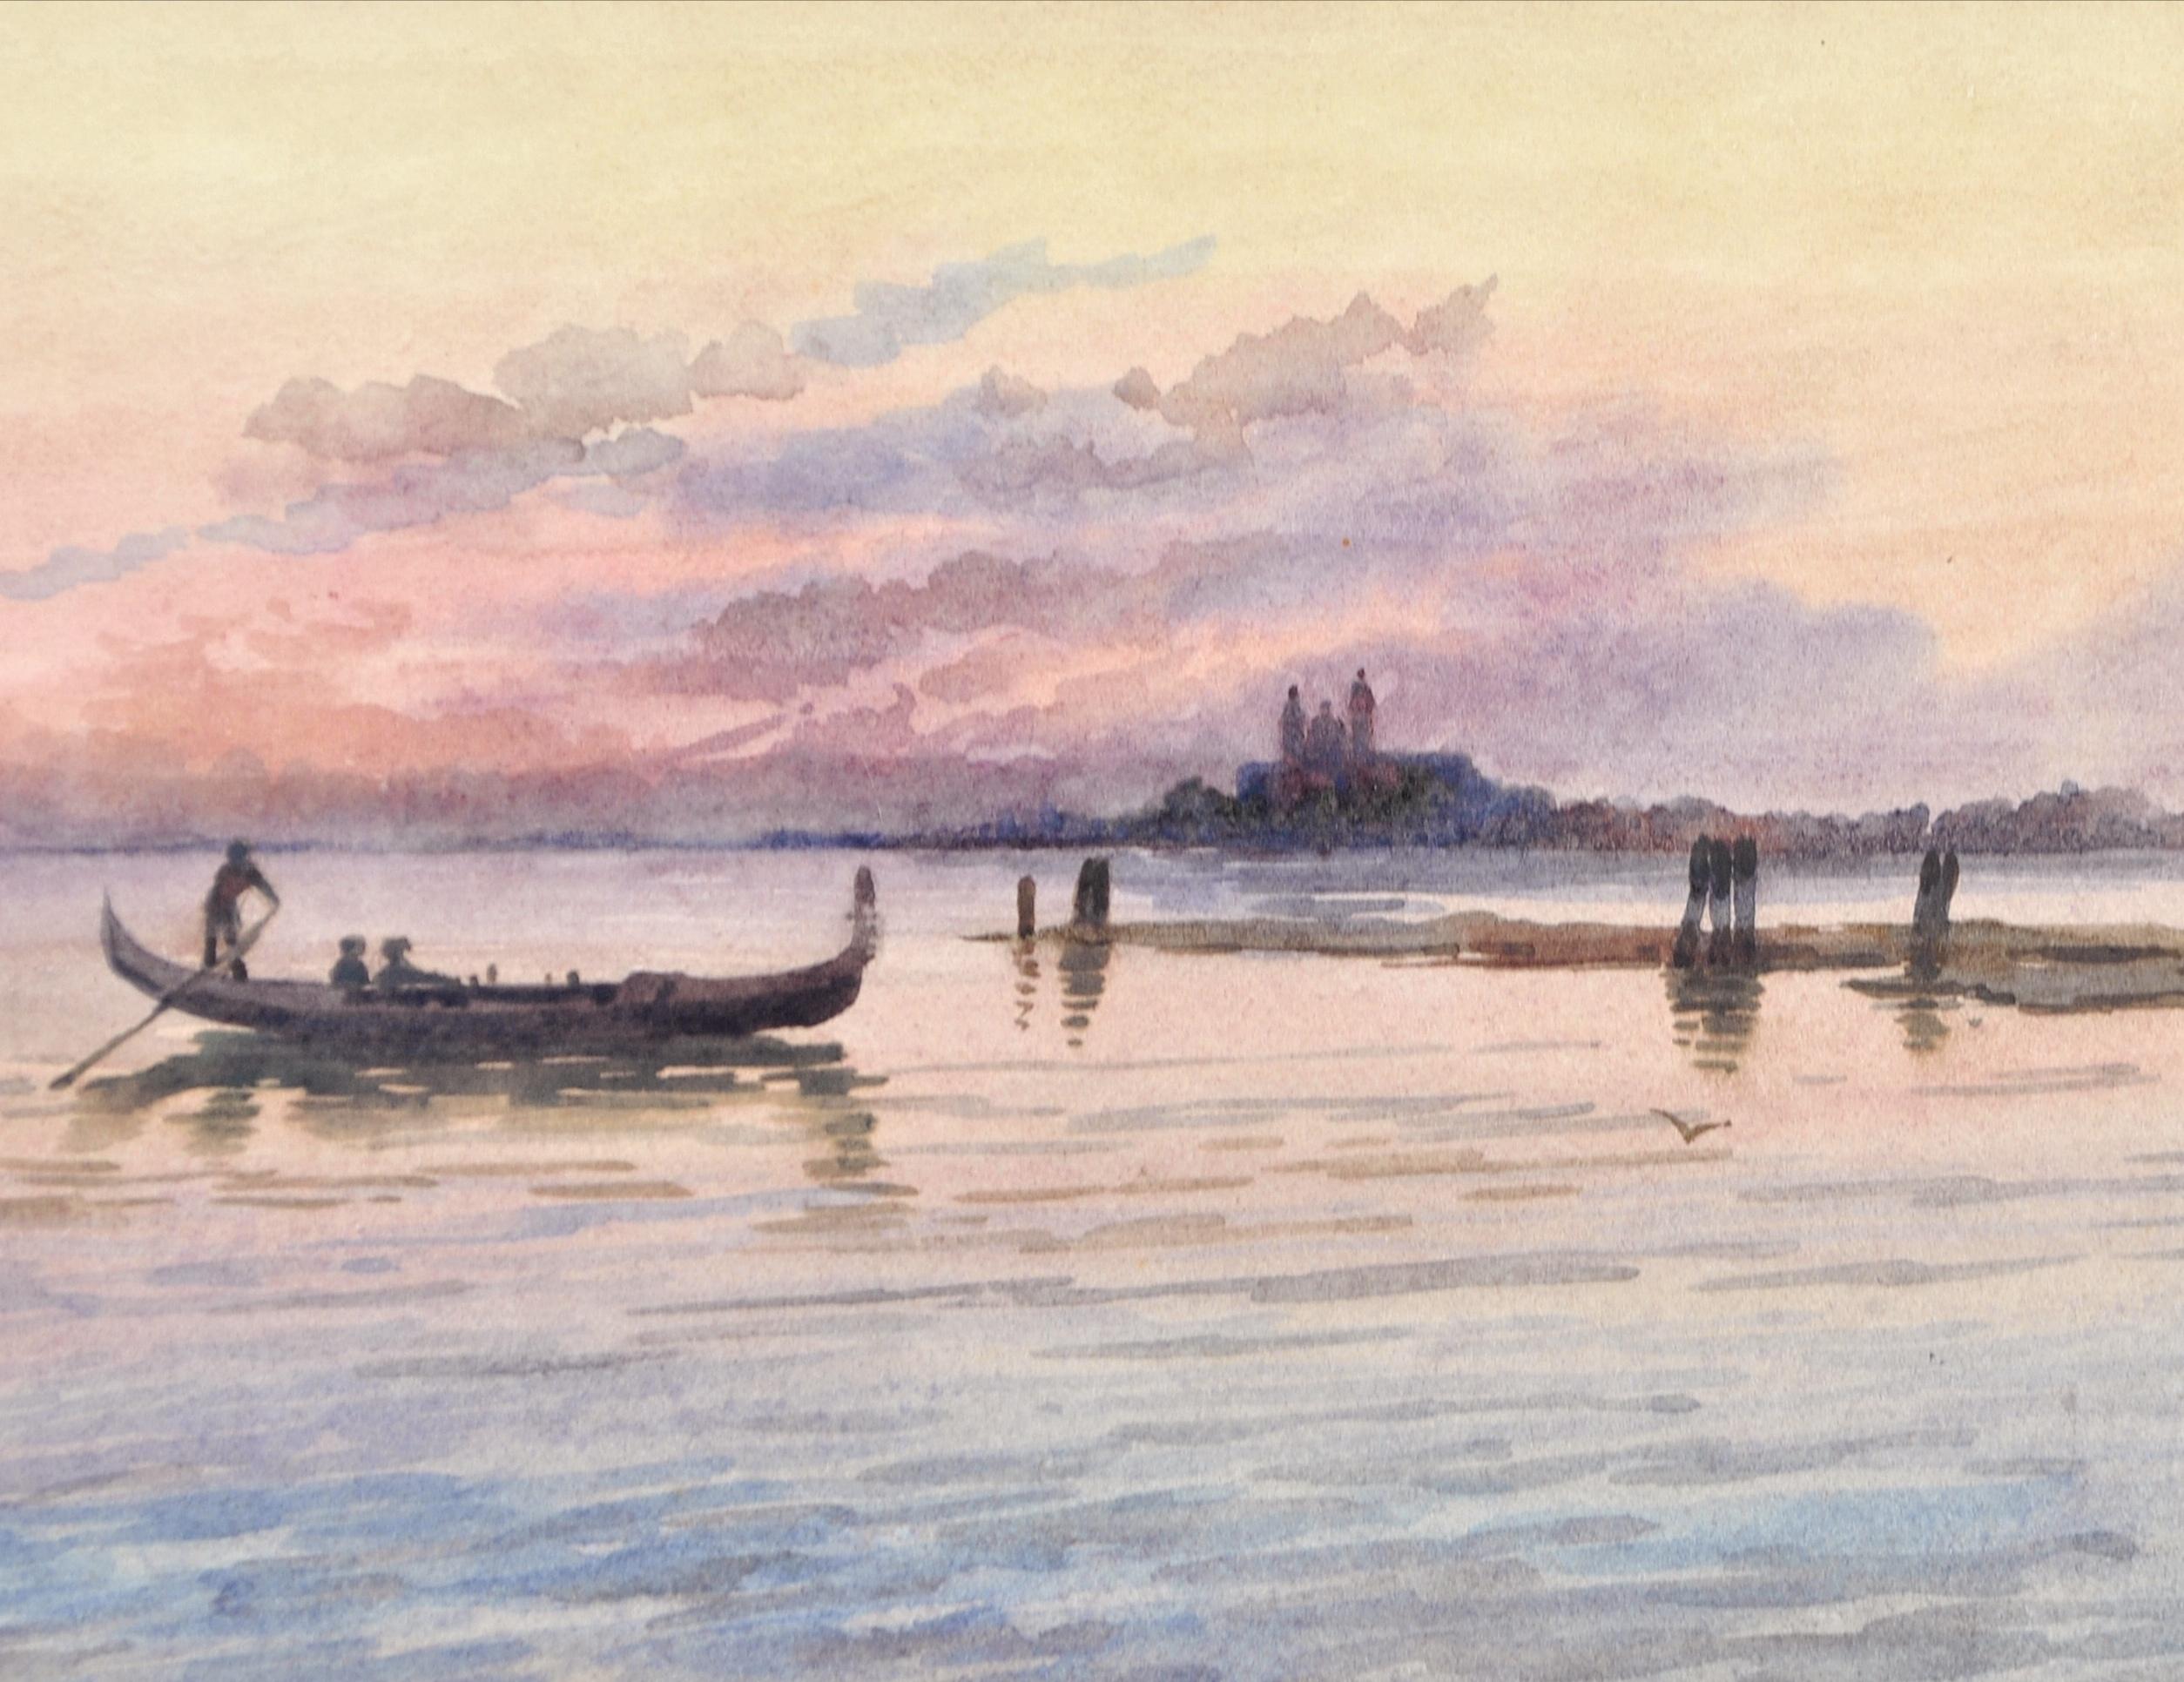 A fine signed and dated 1903 watercolour depicting the Venice Lagoon at sunset by female British artist Nora Butson.

Rare period work by a female artist, who were so often overlooked during their lifetimes and are now being much more appreciated